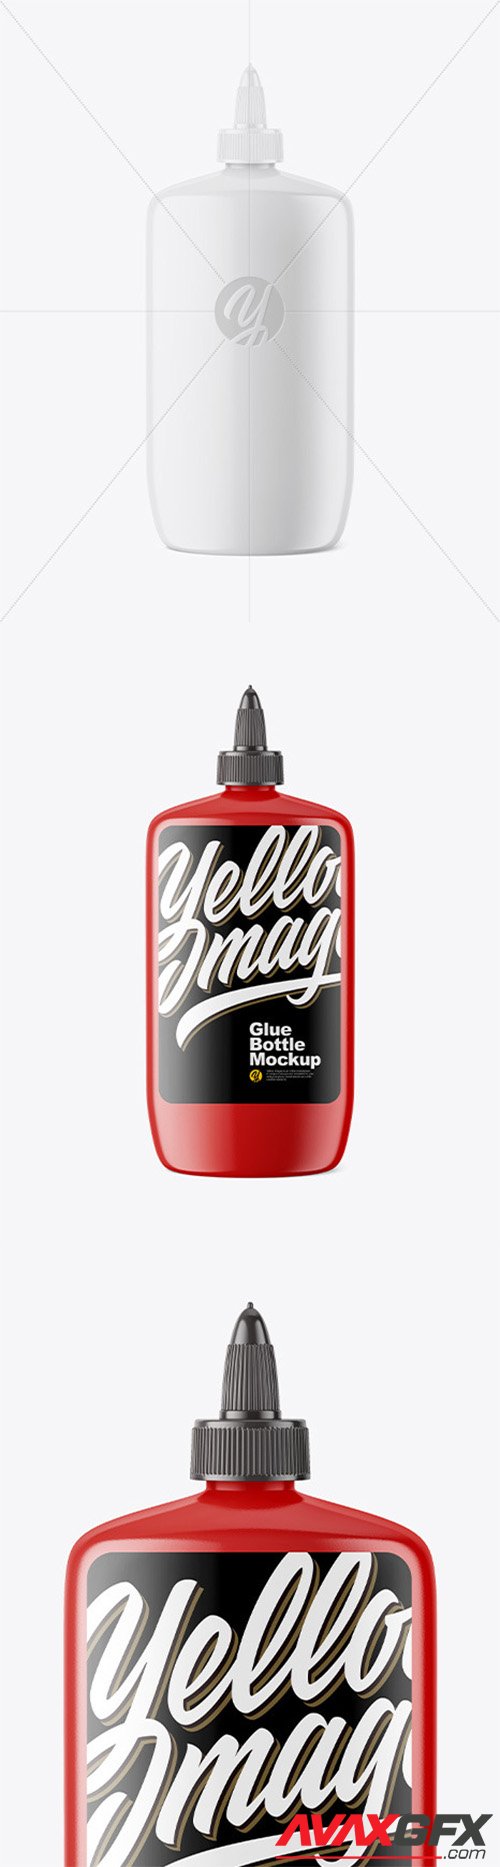 Download Yellowimages Mockups Glossy Glue Bottle Mockup Psd Yellowimages Mockups